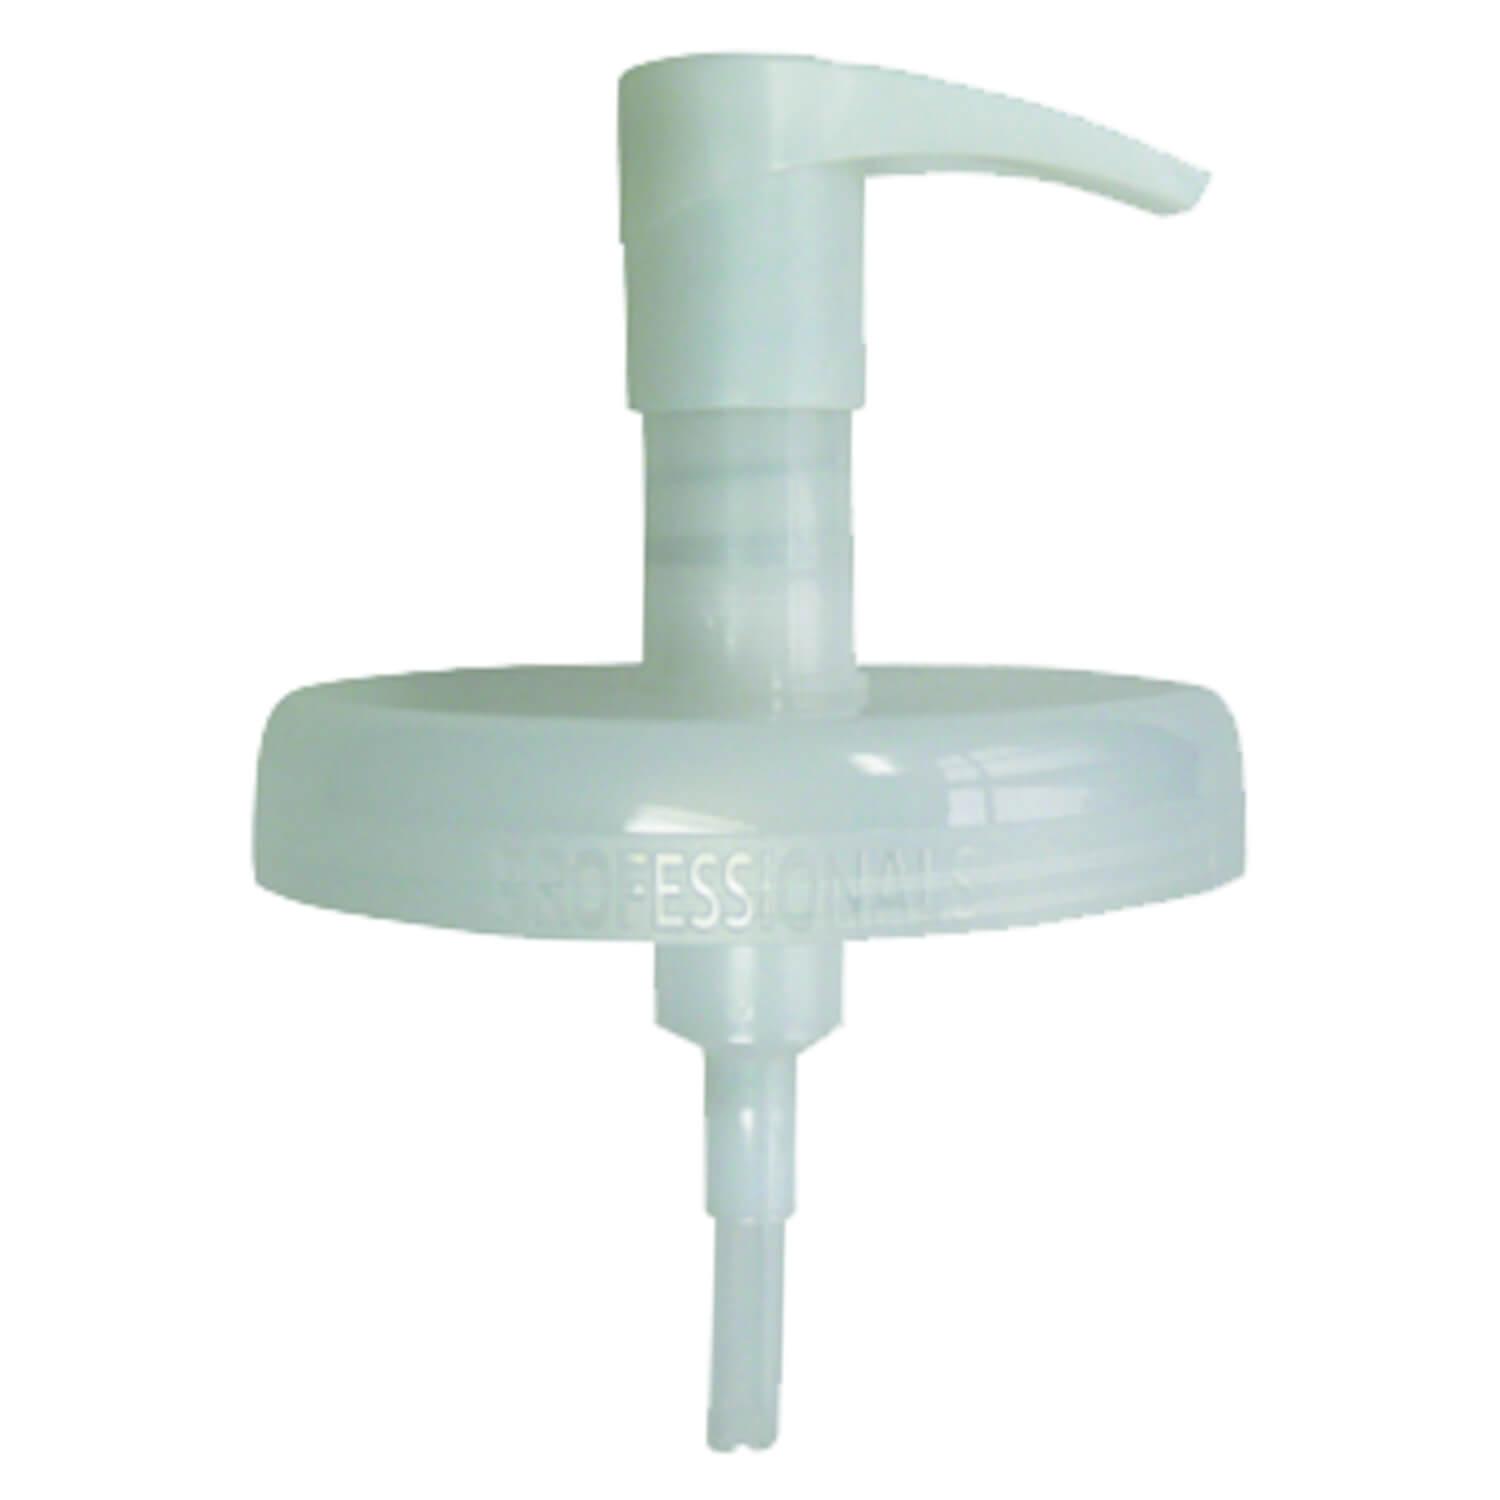 Wella Tools - Pump for 500ml Mask by Wella.